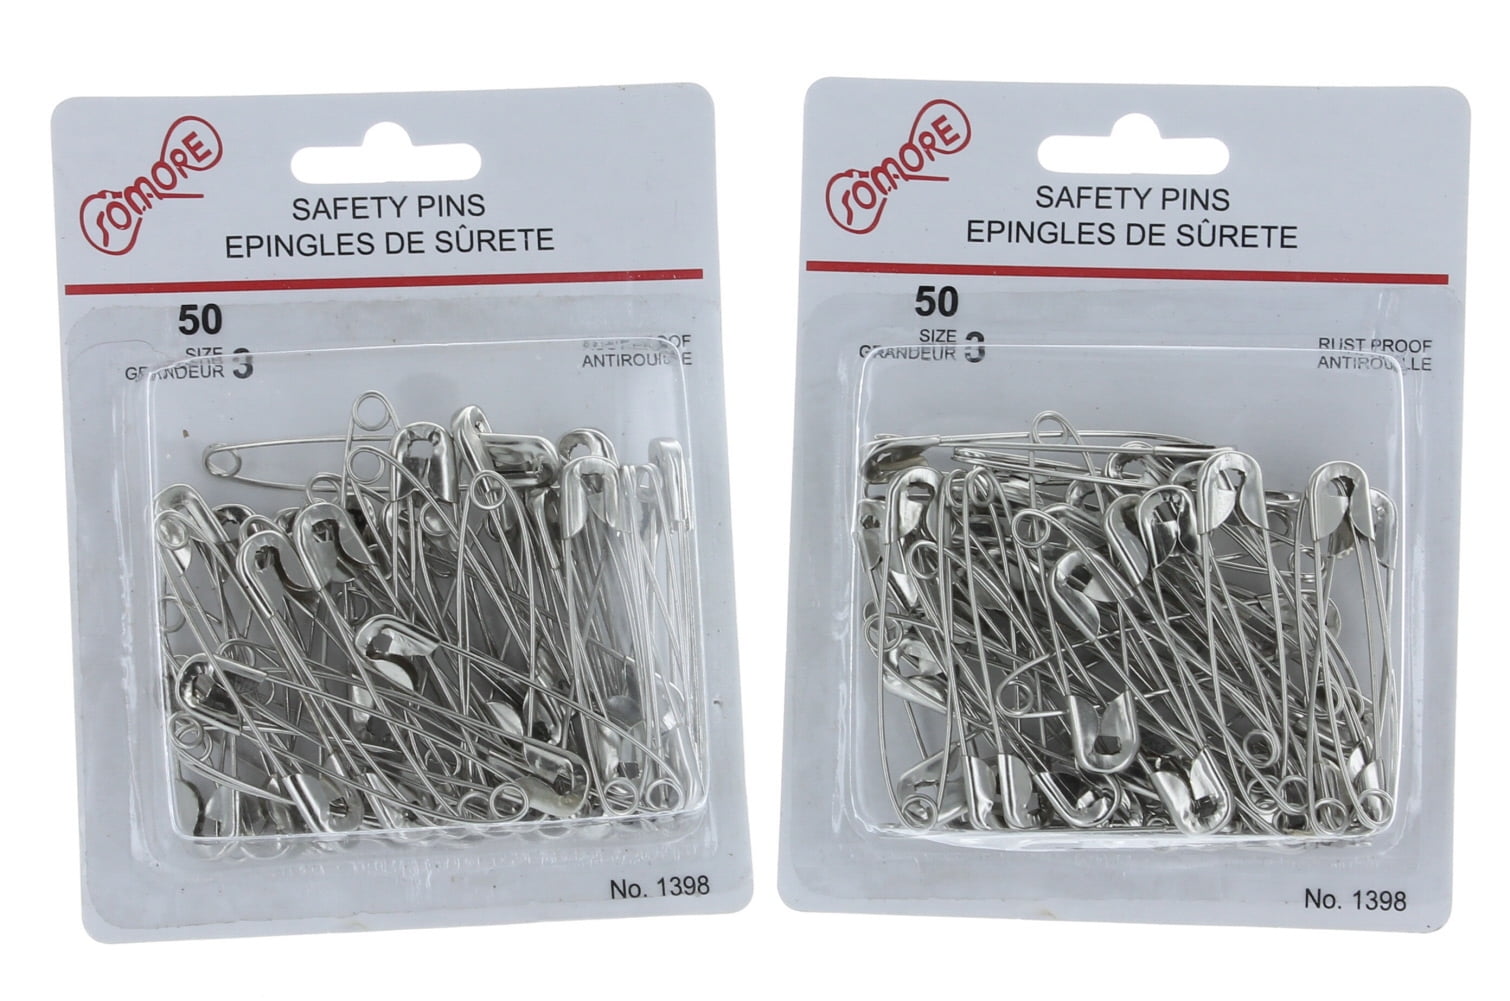 NEW METAL SAFETY PINS SILVER SEWING COSTUME CRAFT DRESS MAKING TOP QUALITY